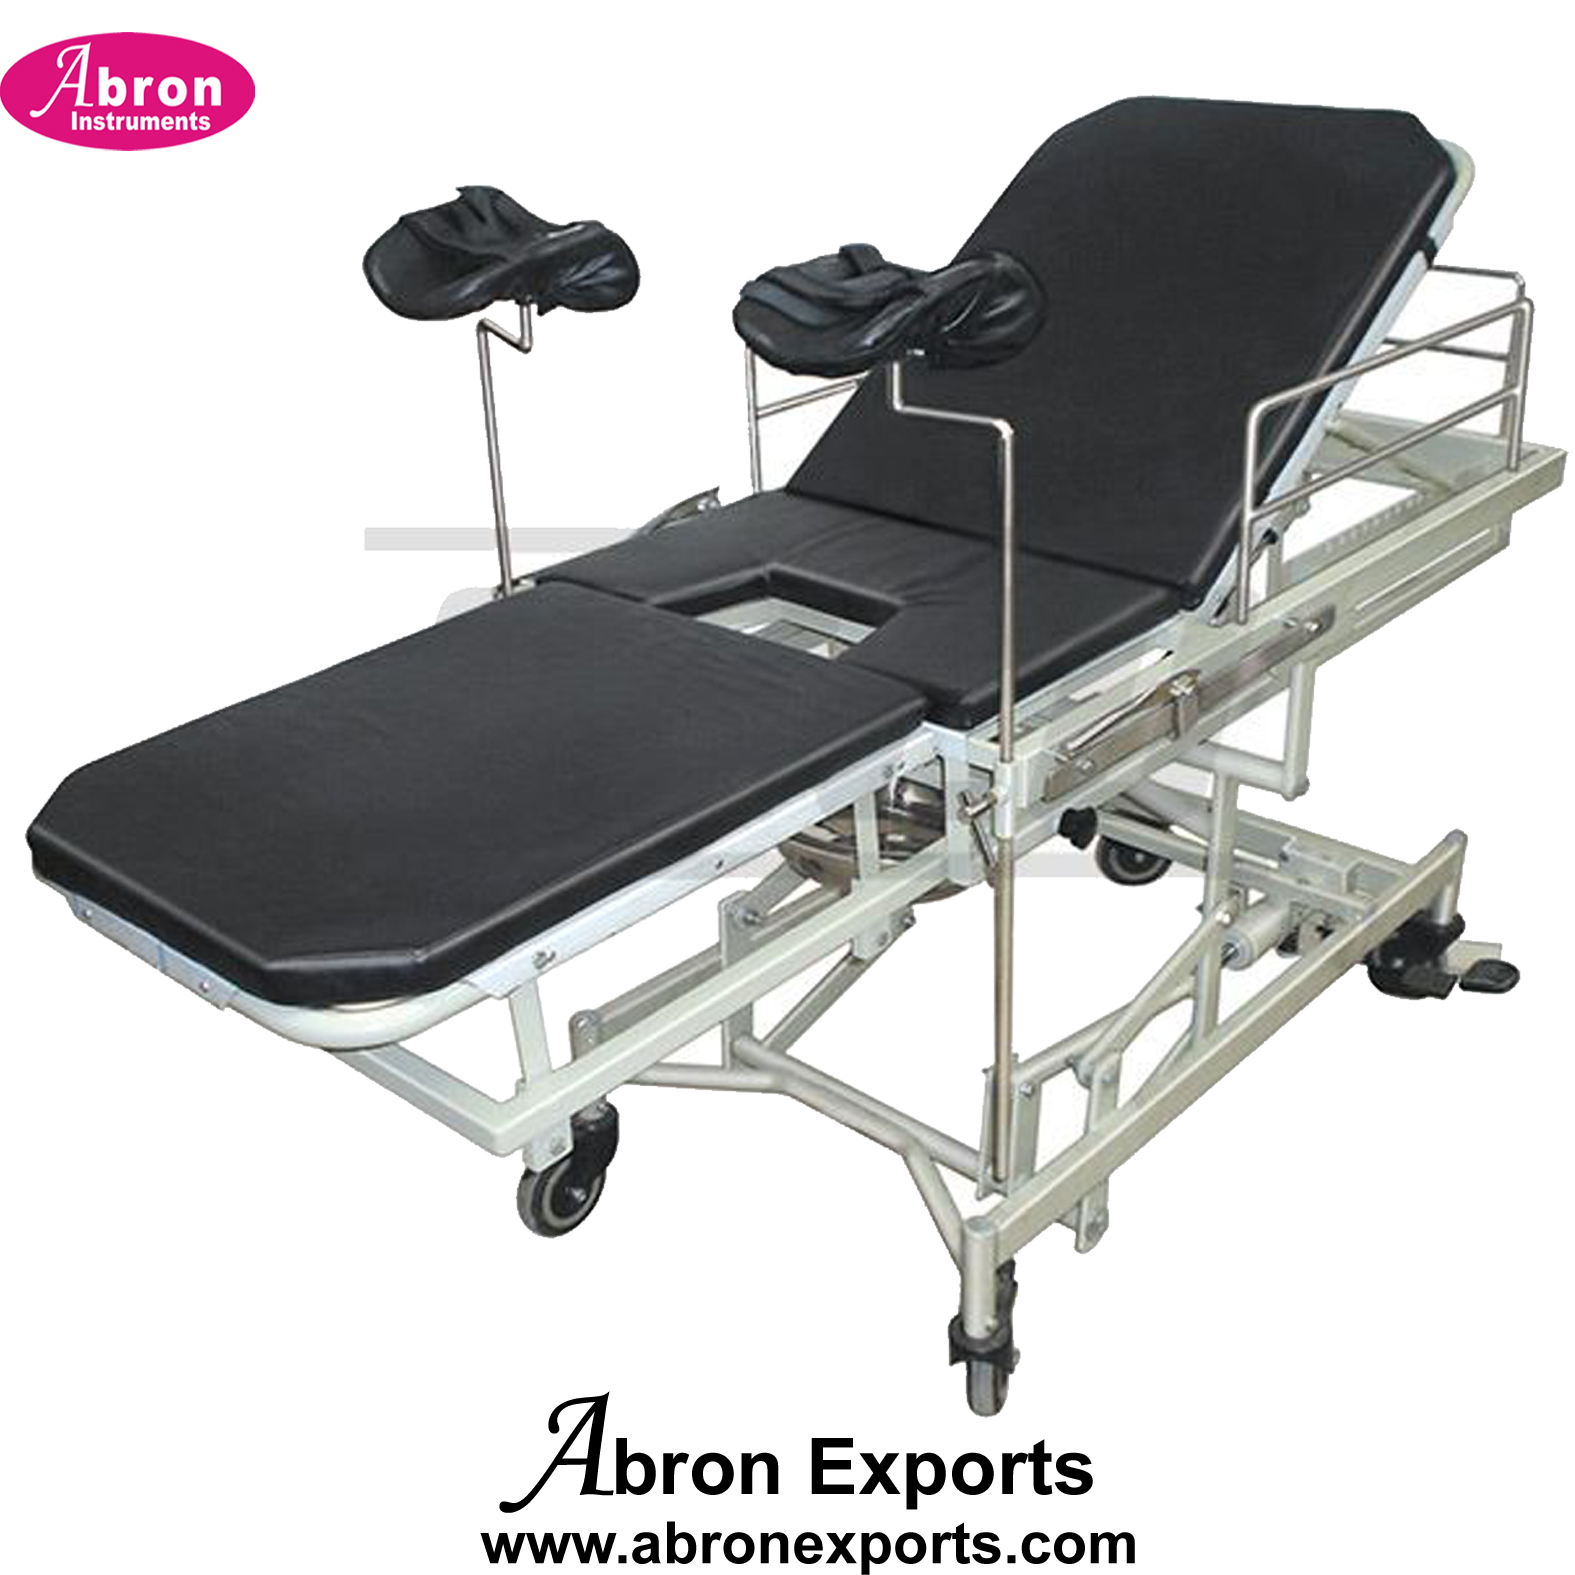 Gynecological Delivery Obsteric Labout Table Telescopic Adjustment Hight with legs wheels support Abron ABM-2714GTH 